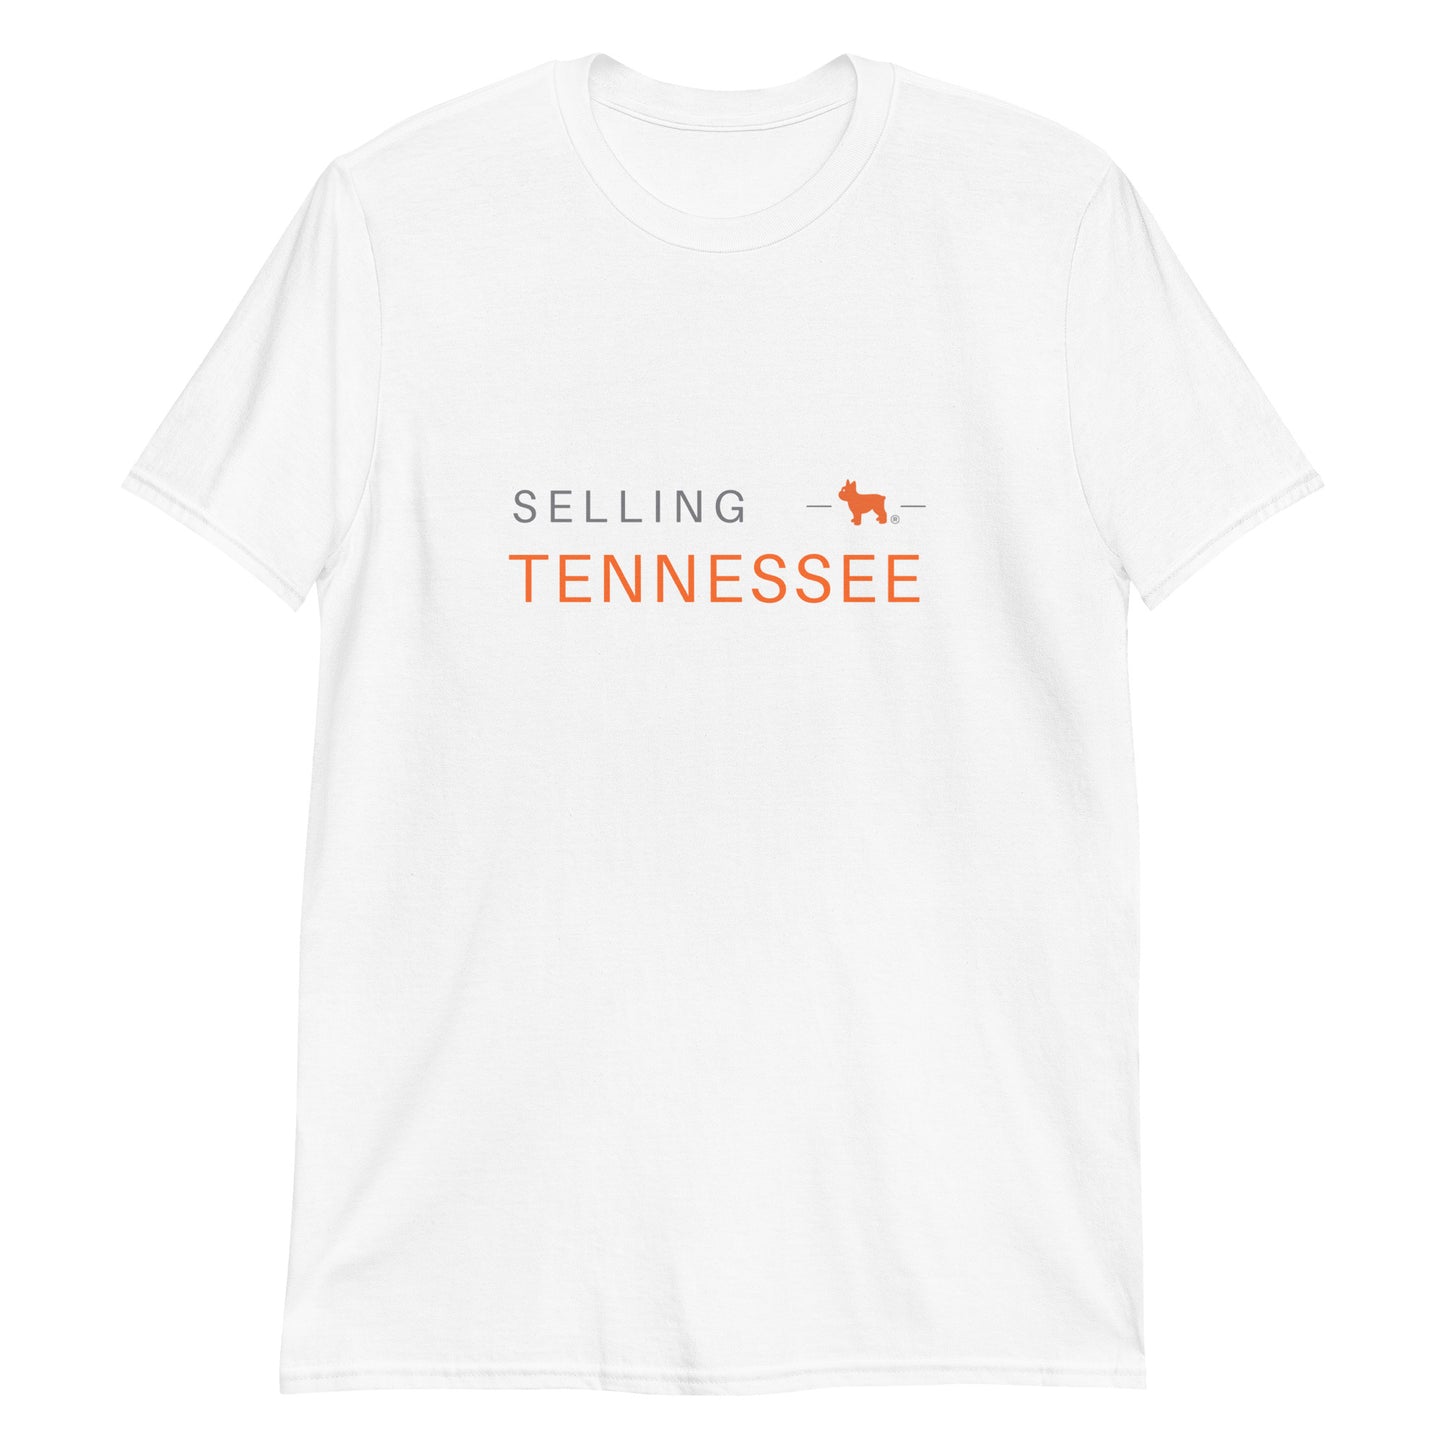 Selling Tennessee Short-Sleeve Unisex T-Shirt